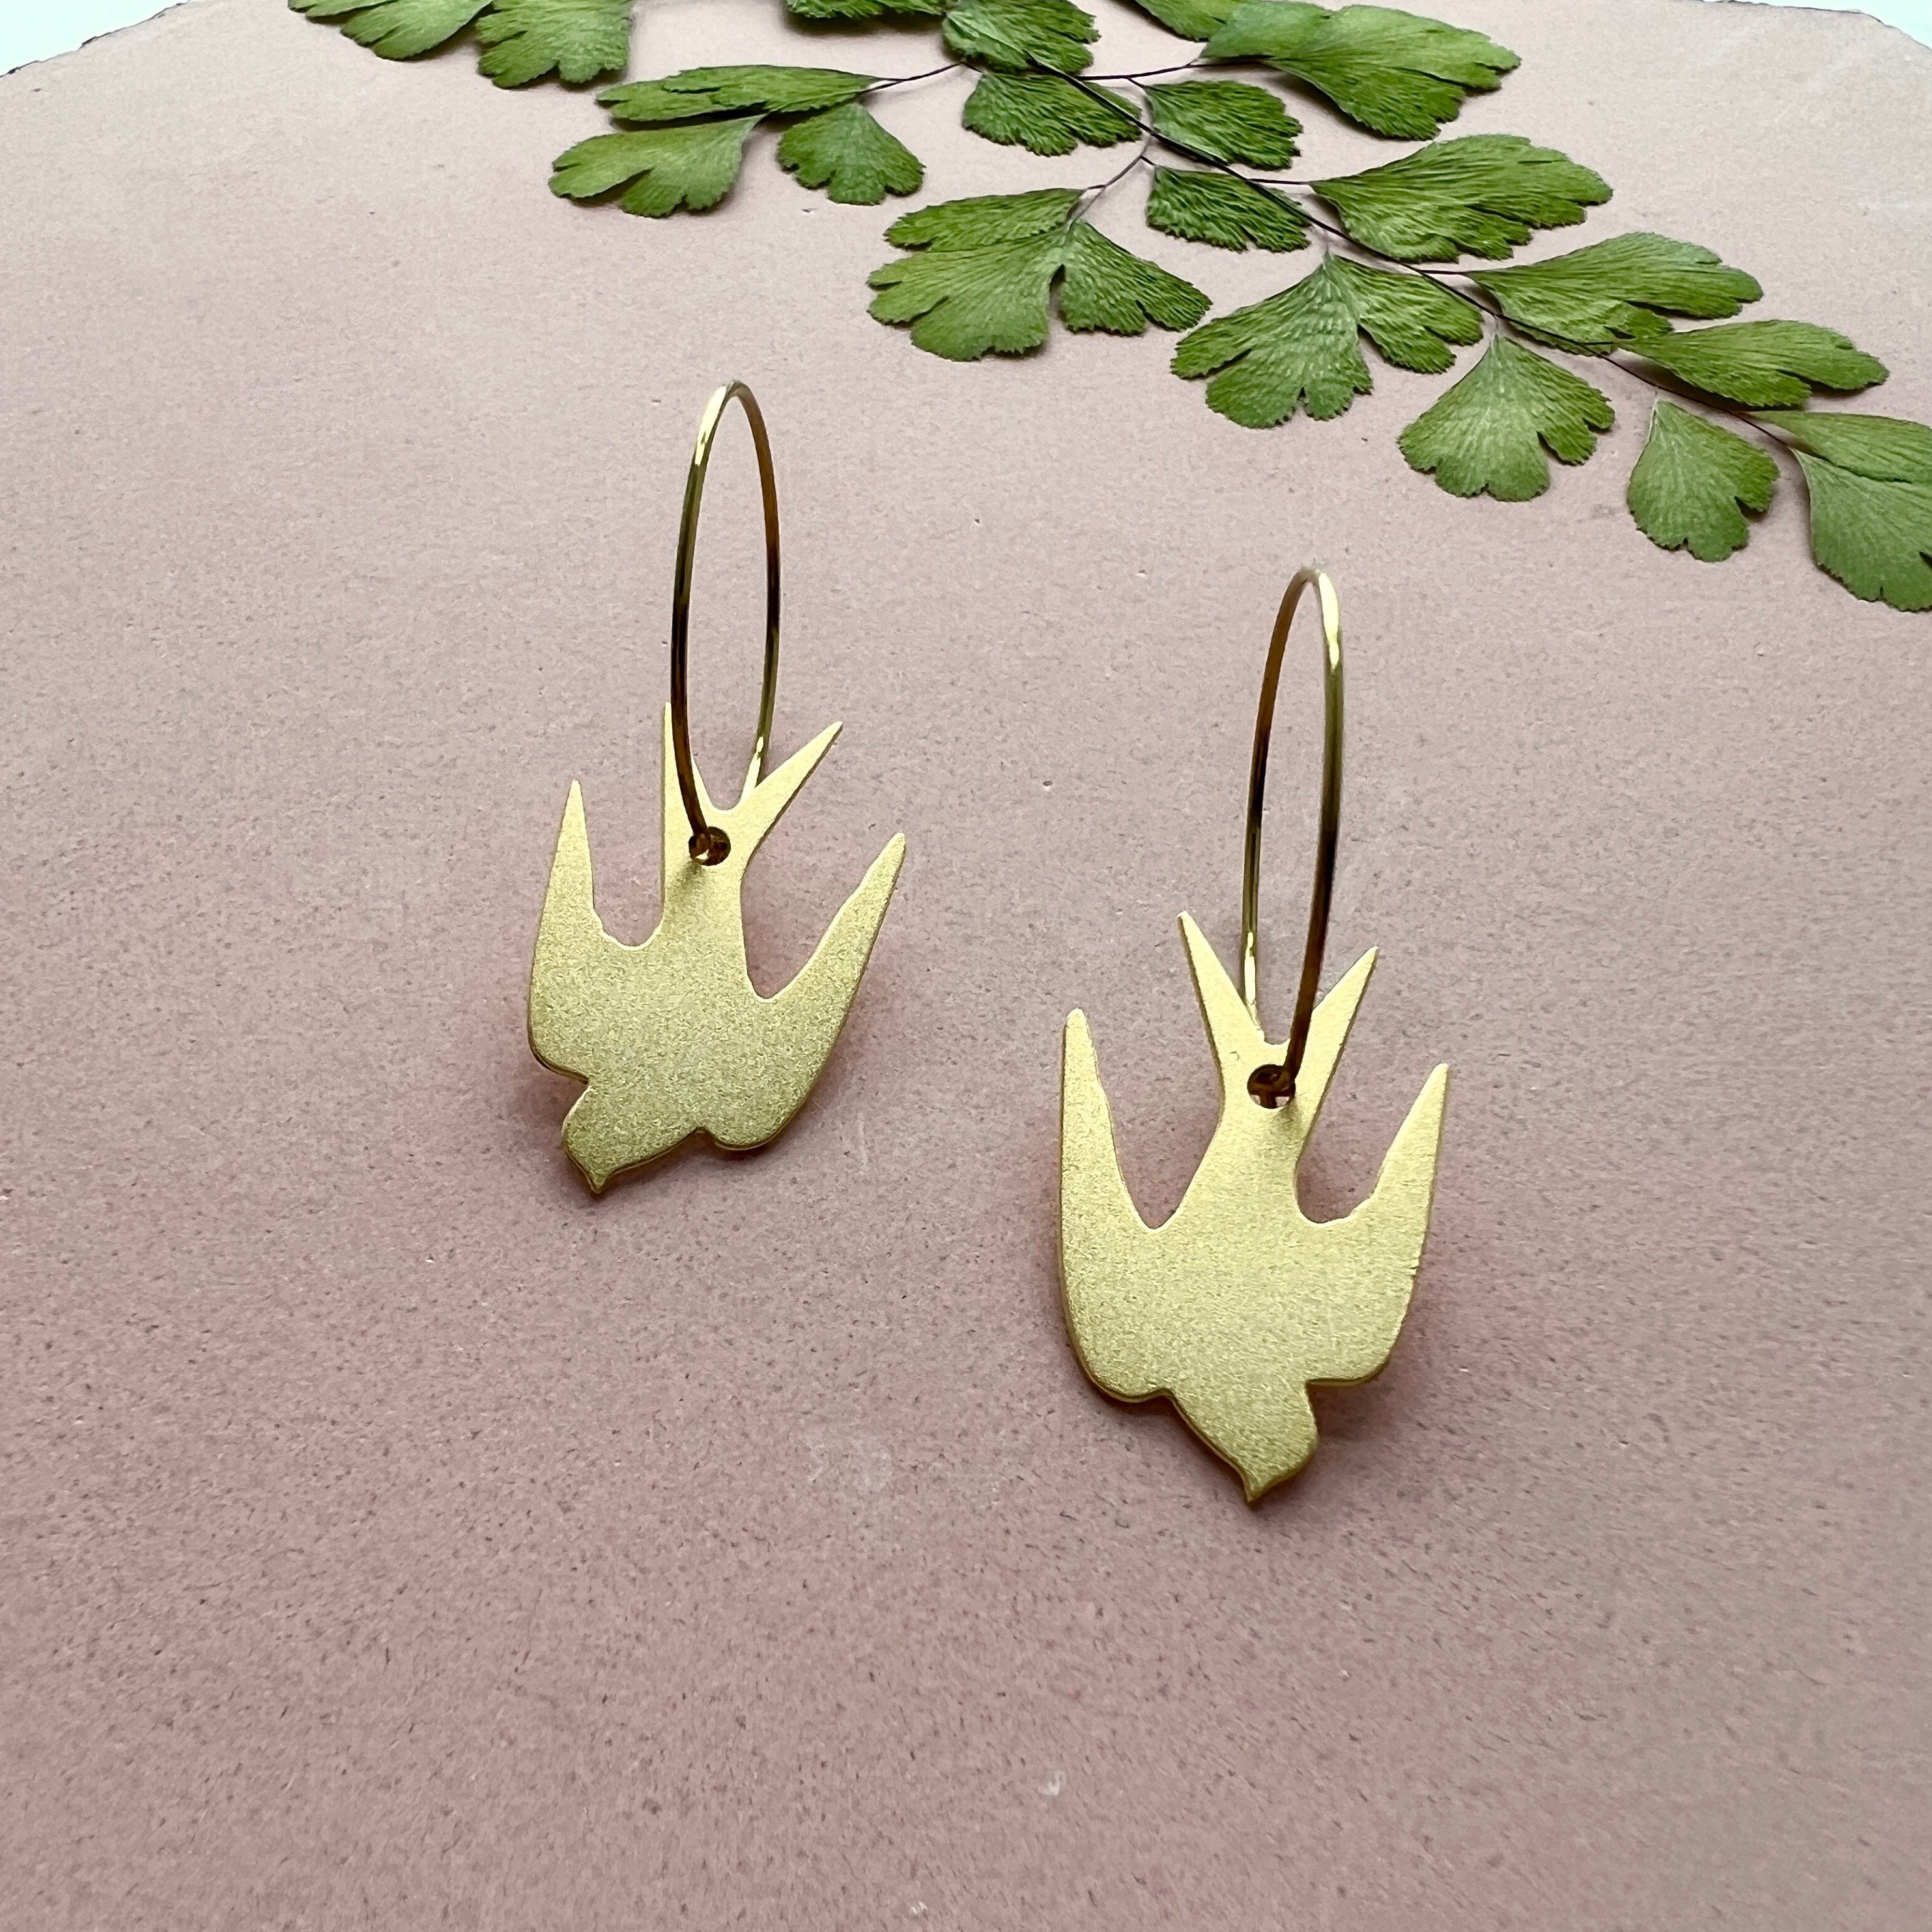 Swallow Hoop Earrings - Gift For Mum Bird Hoops Dangle Gifts Her Bridesmaid Gold & Silver